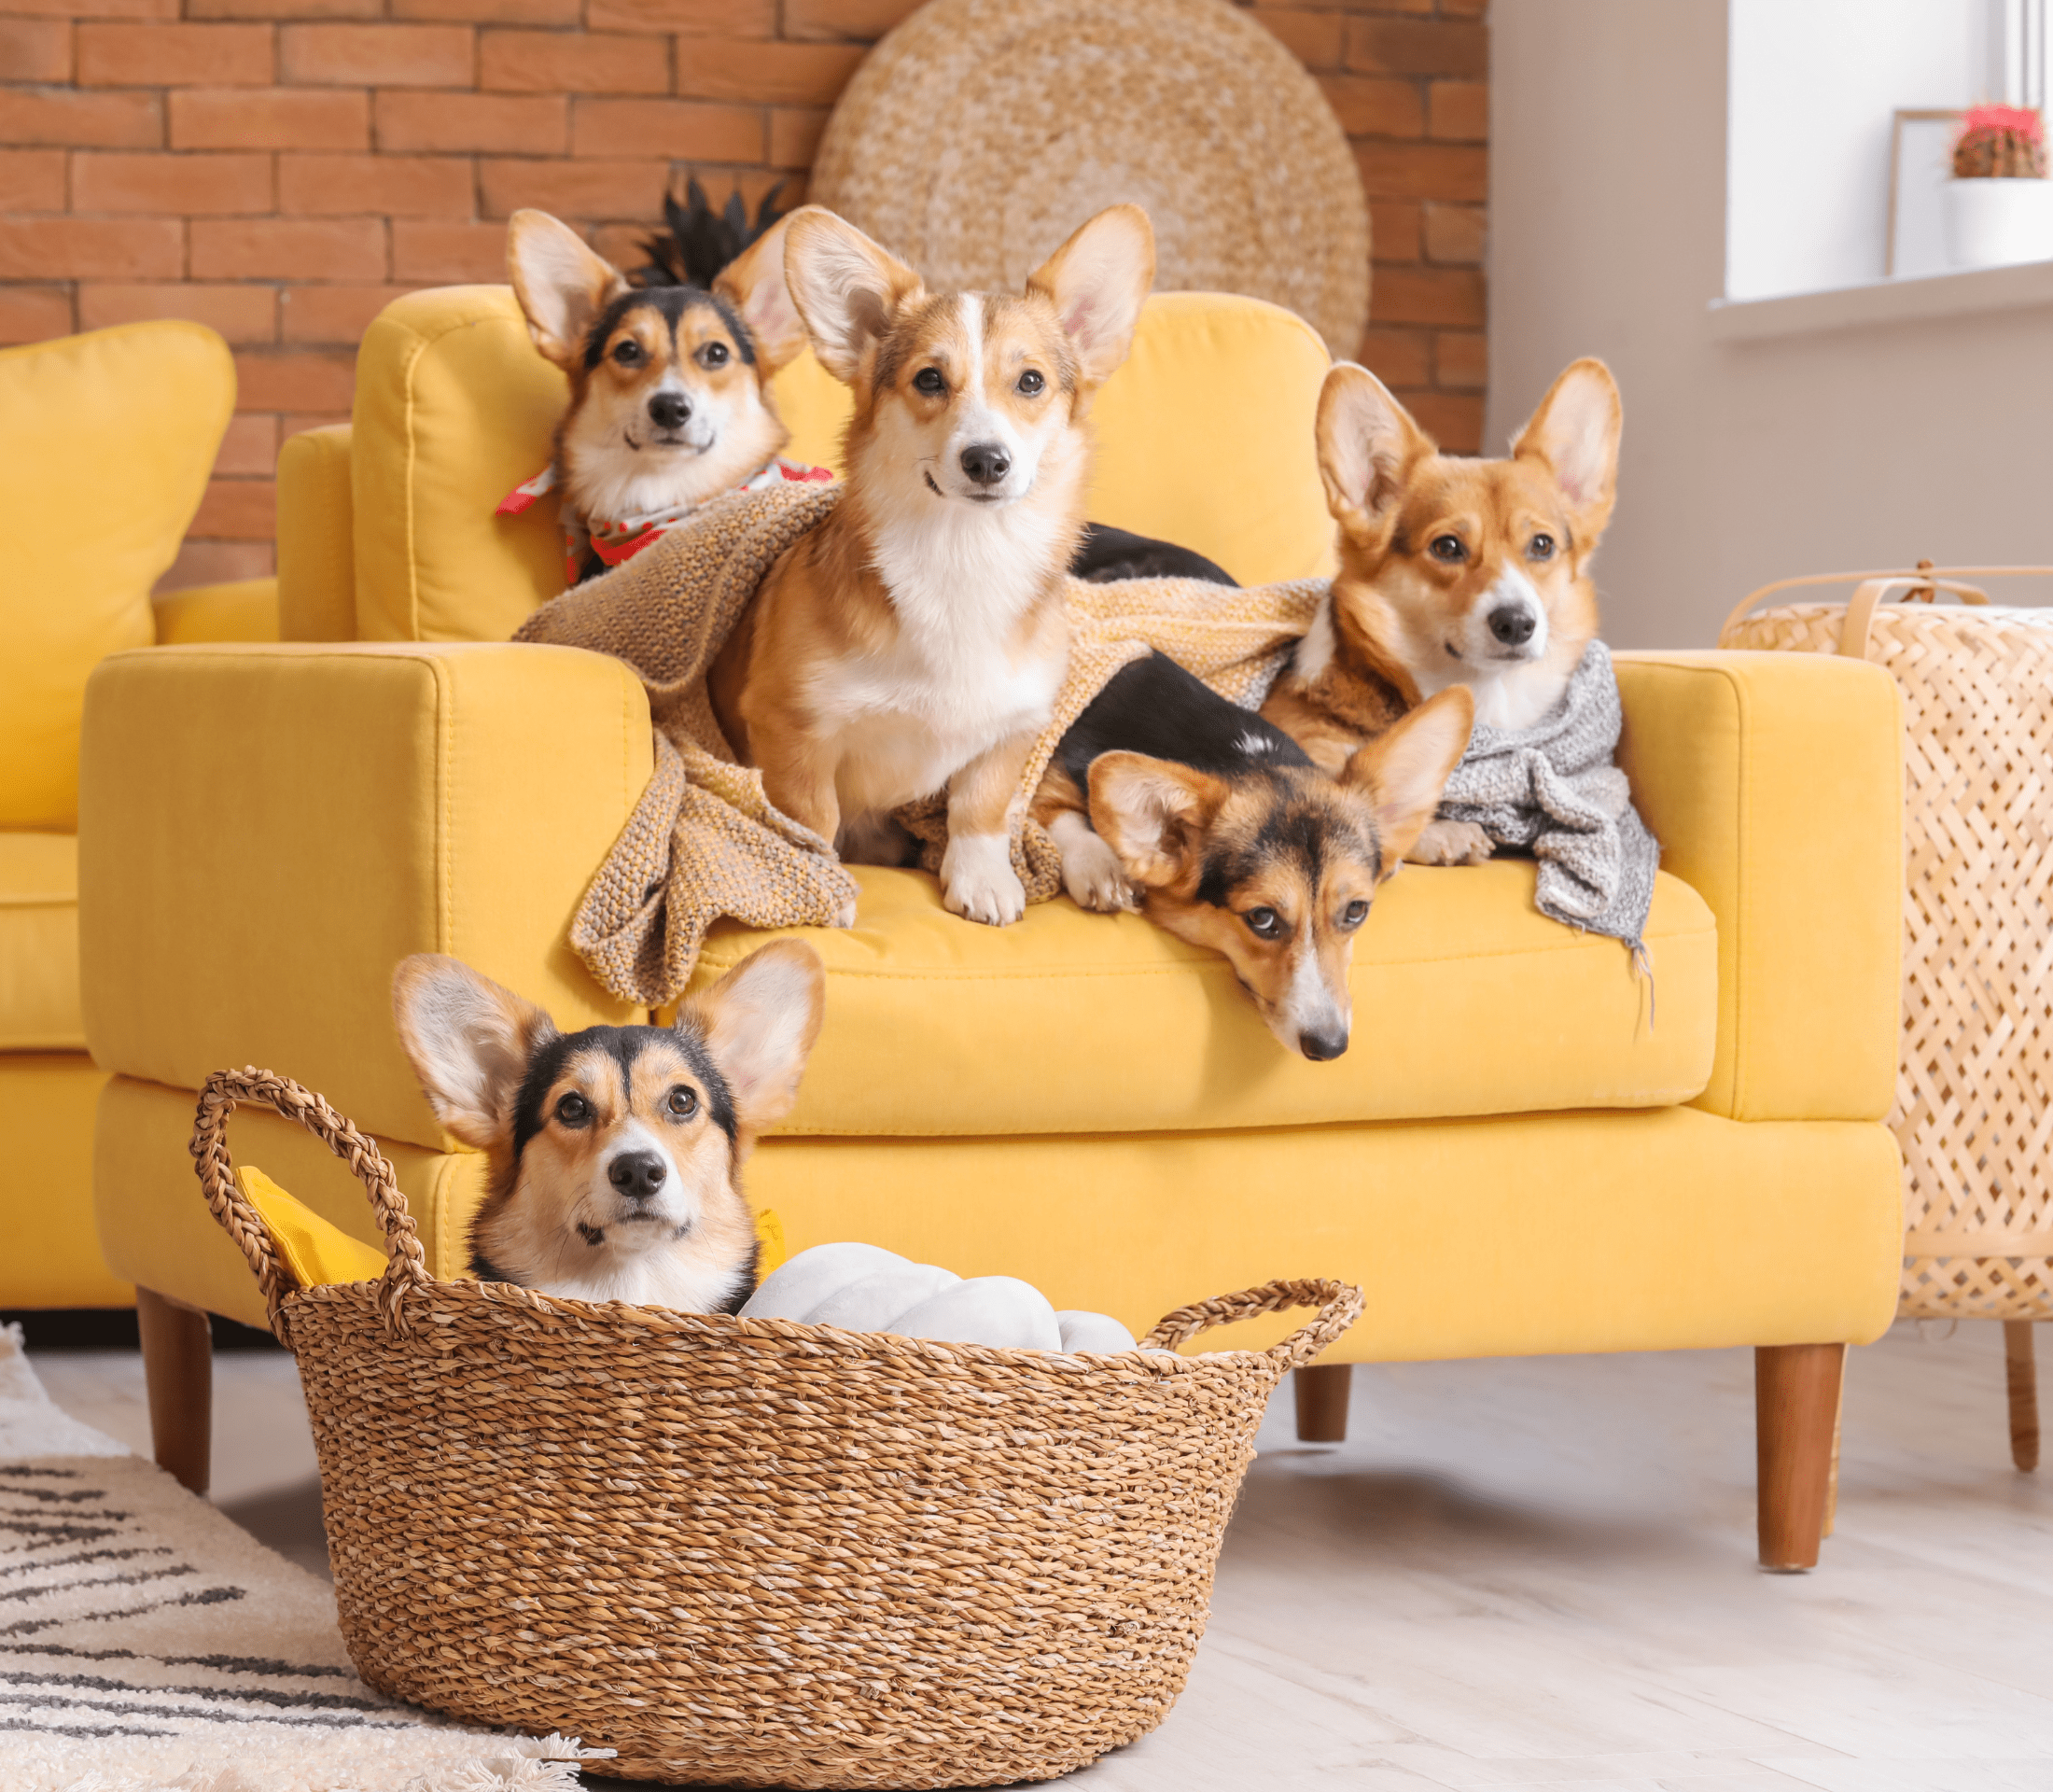 Five brown corgies in a yellow couch and brown basket